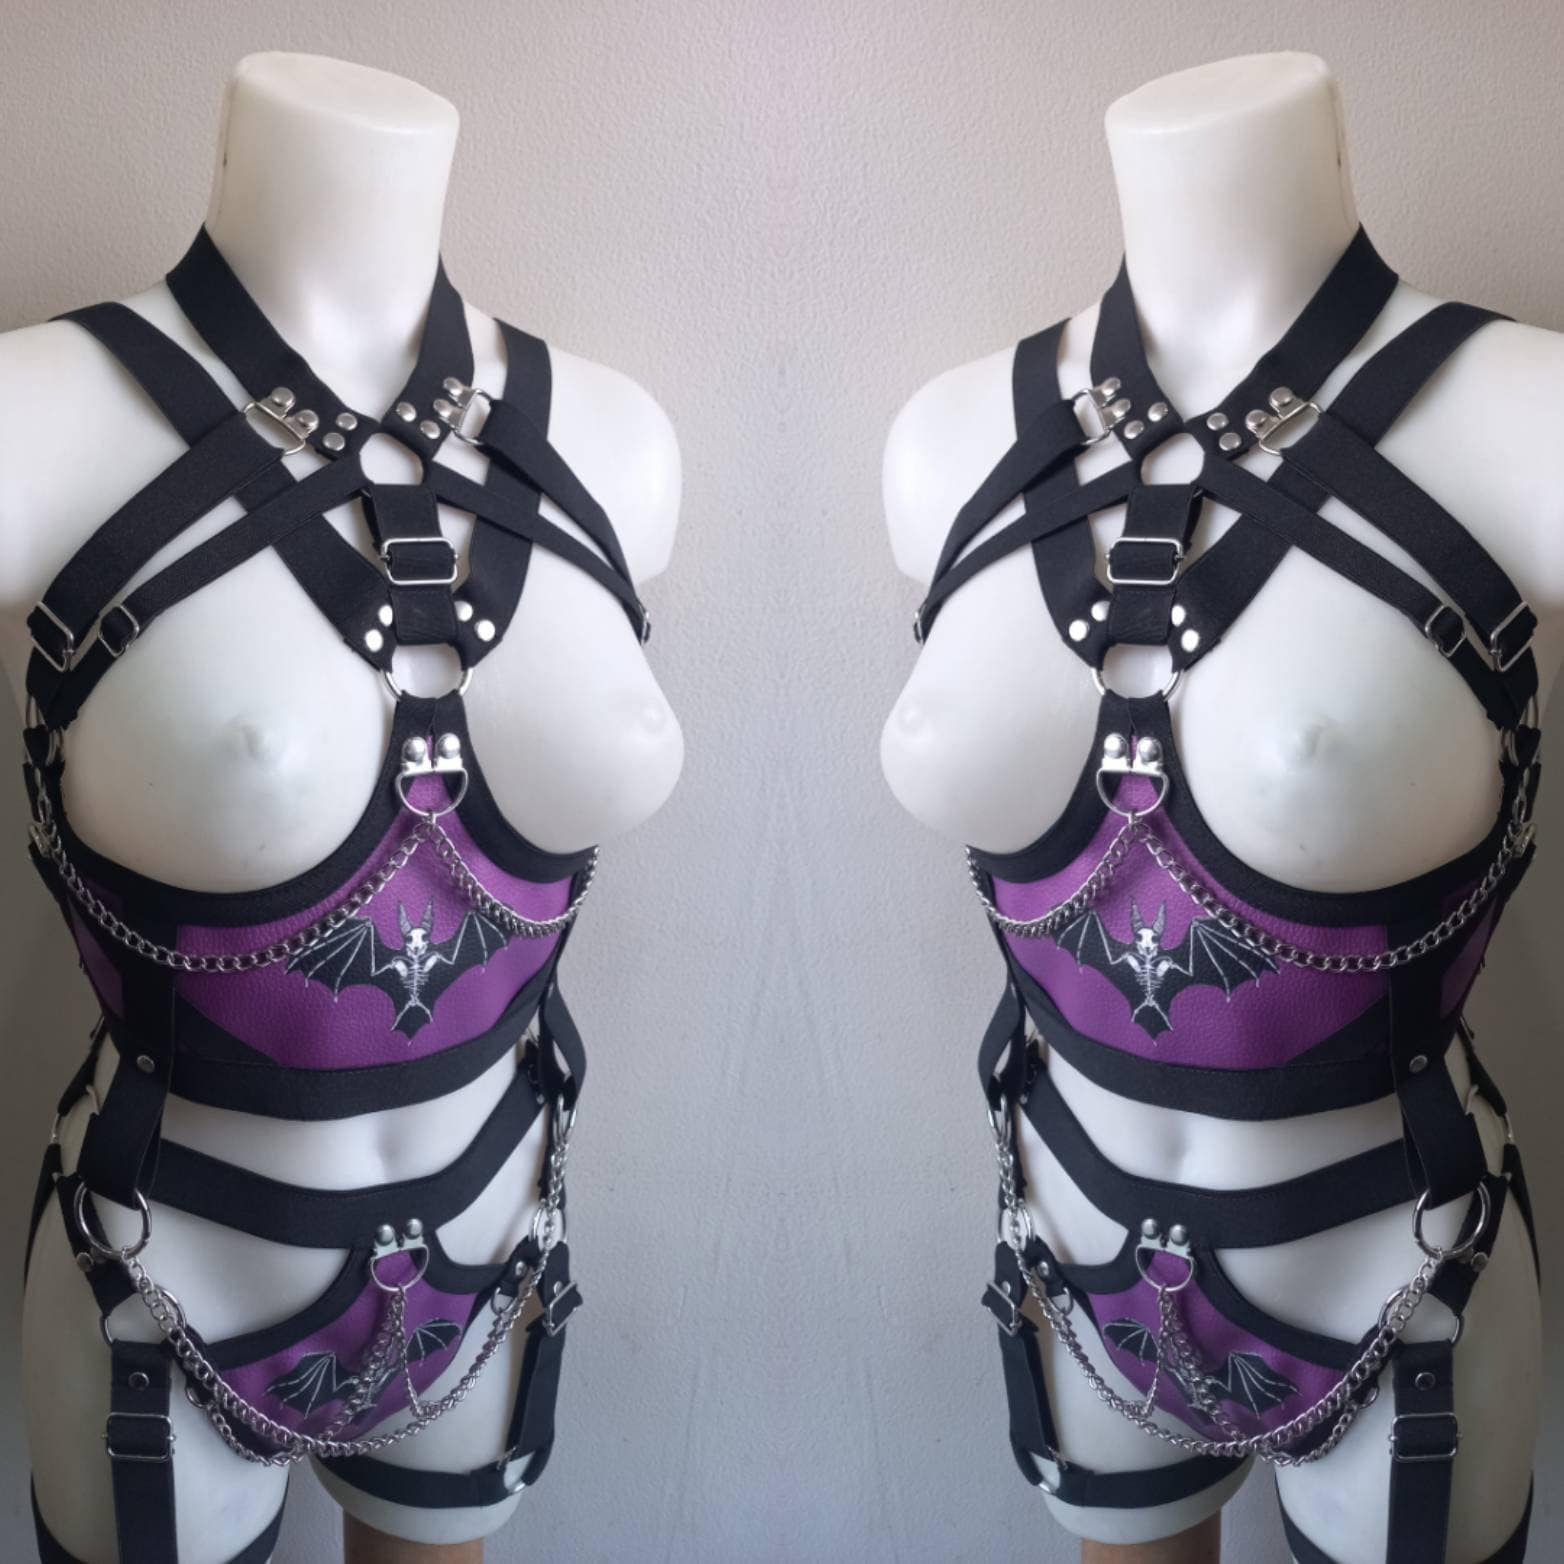 bat inspired outfit -purple printed full body harness and maxy skirt gothic vampire style witchy outfit photo